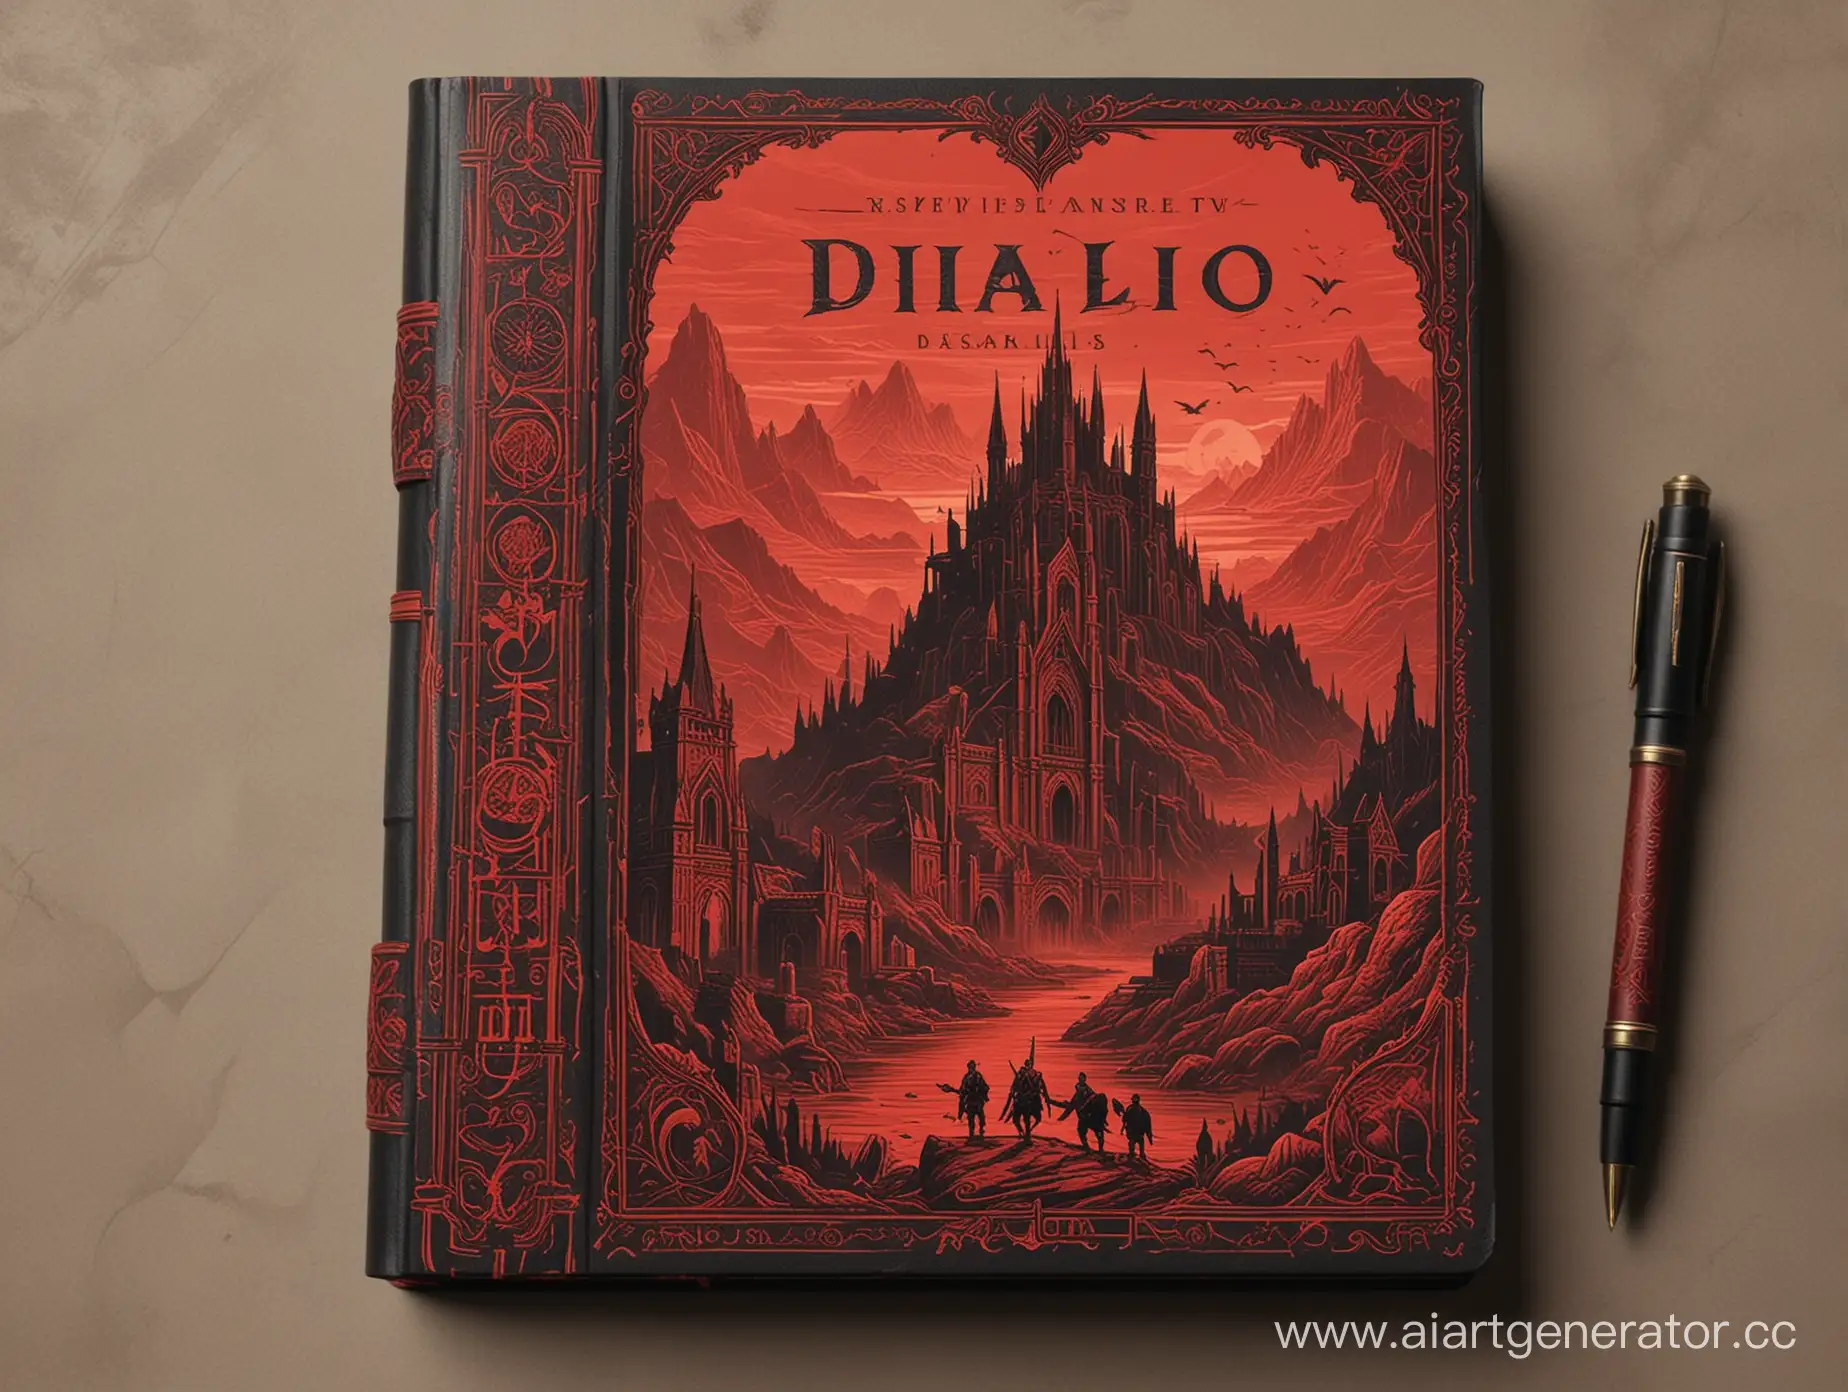 Dark-Fantasy-Travel-Book-Cover-with-Landmarks-in-Red-and-Black-Tones